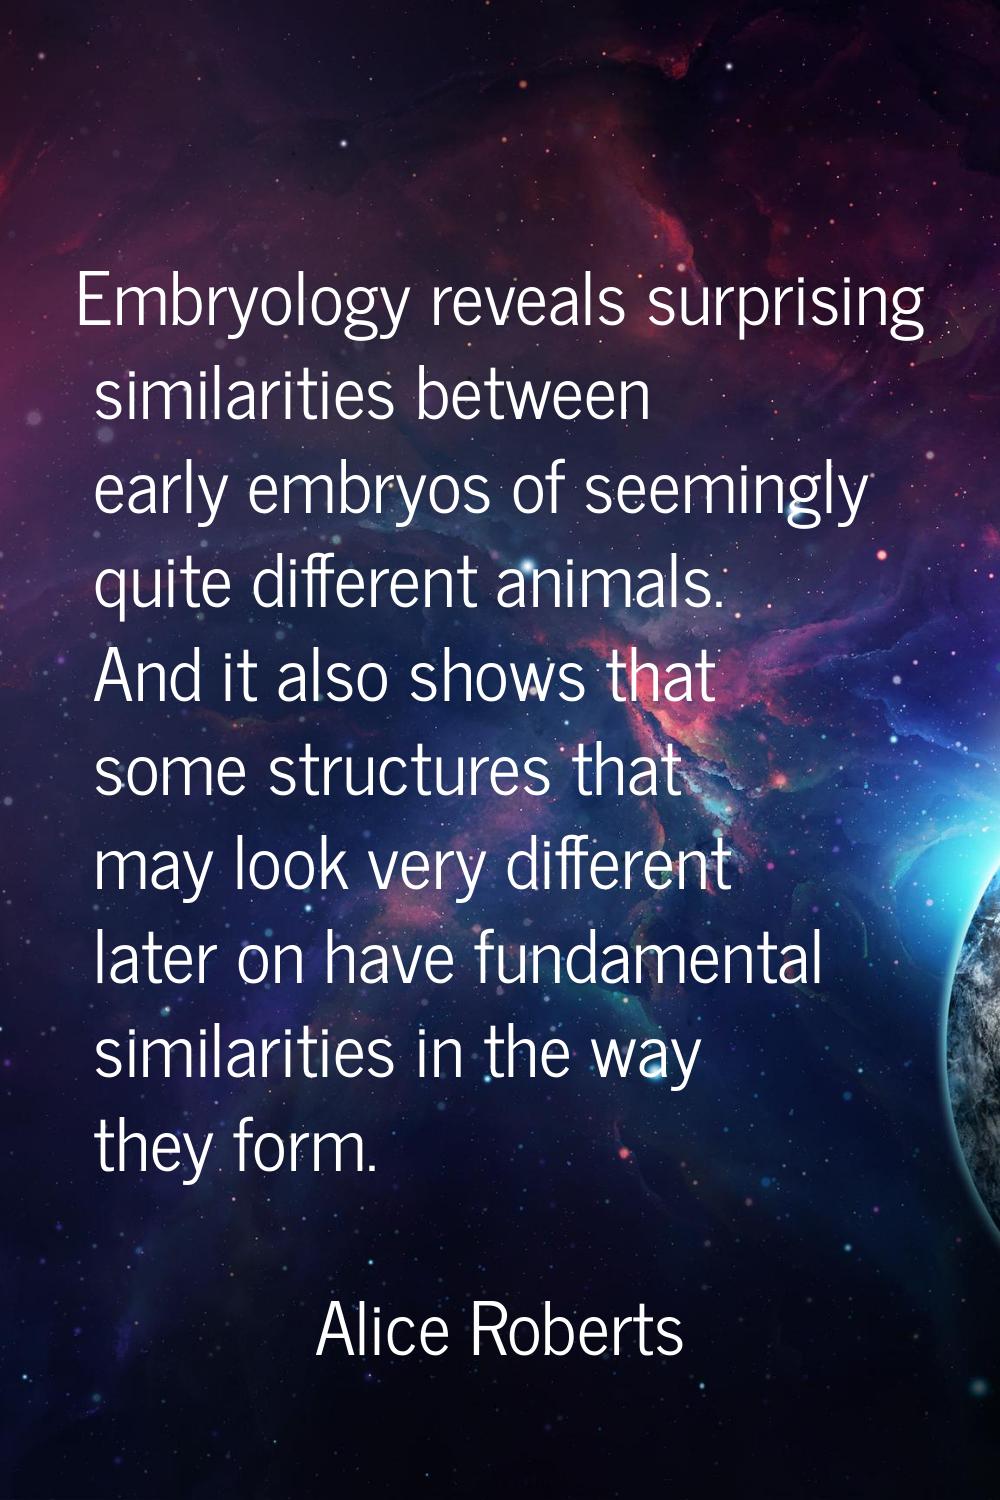 Embryology reveals surprising similarities between early embryos of seemingly quite different anima